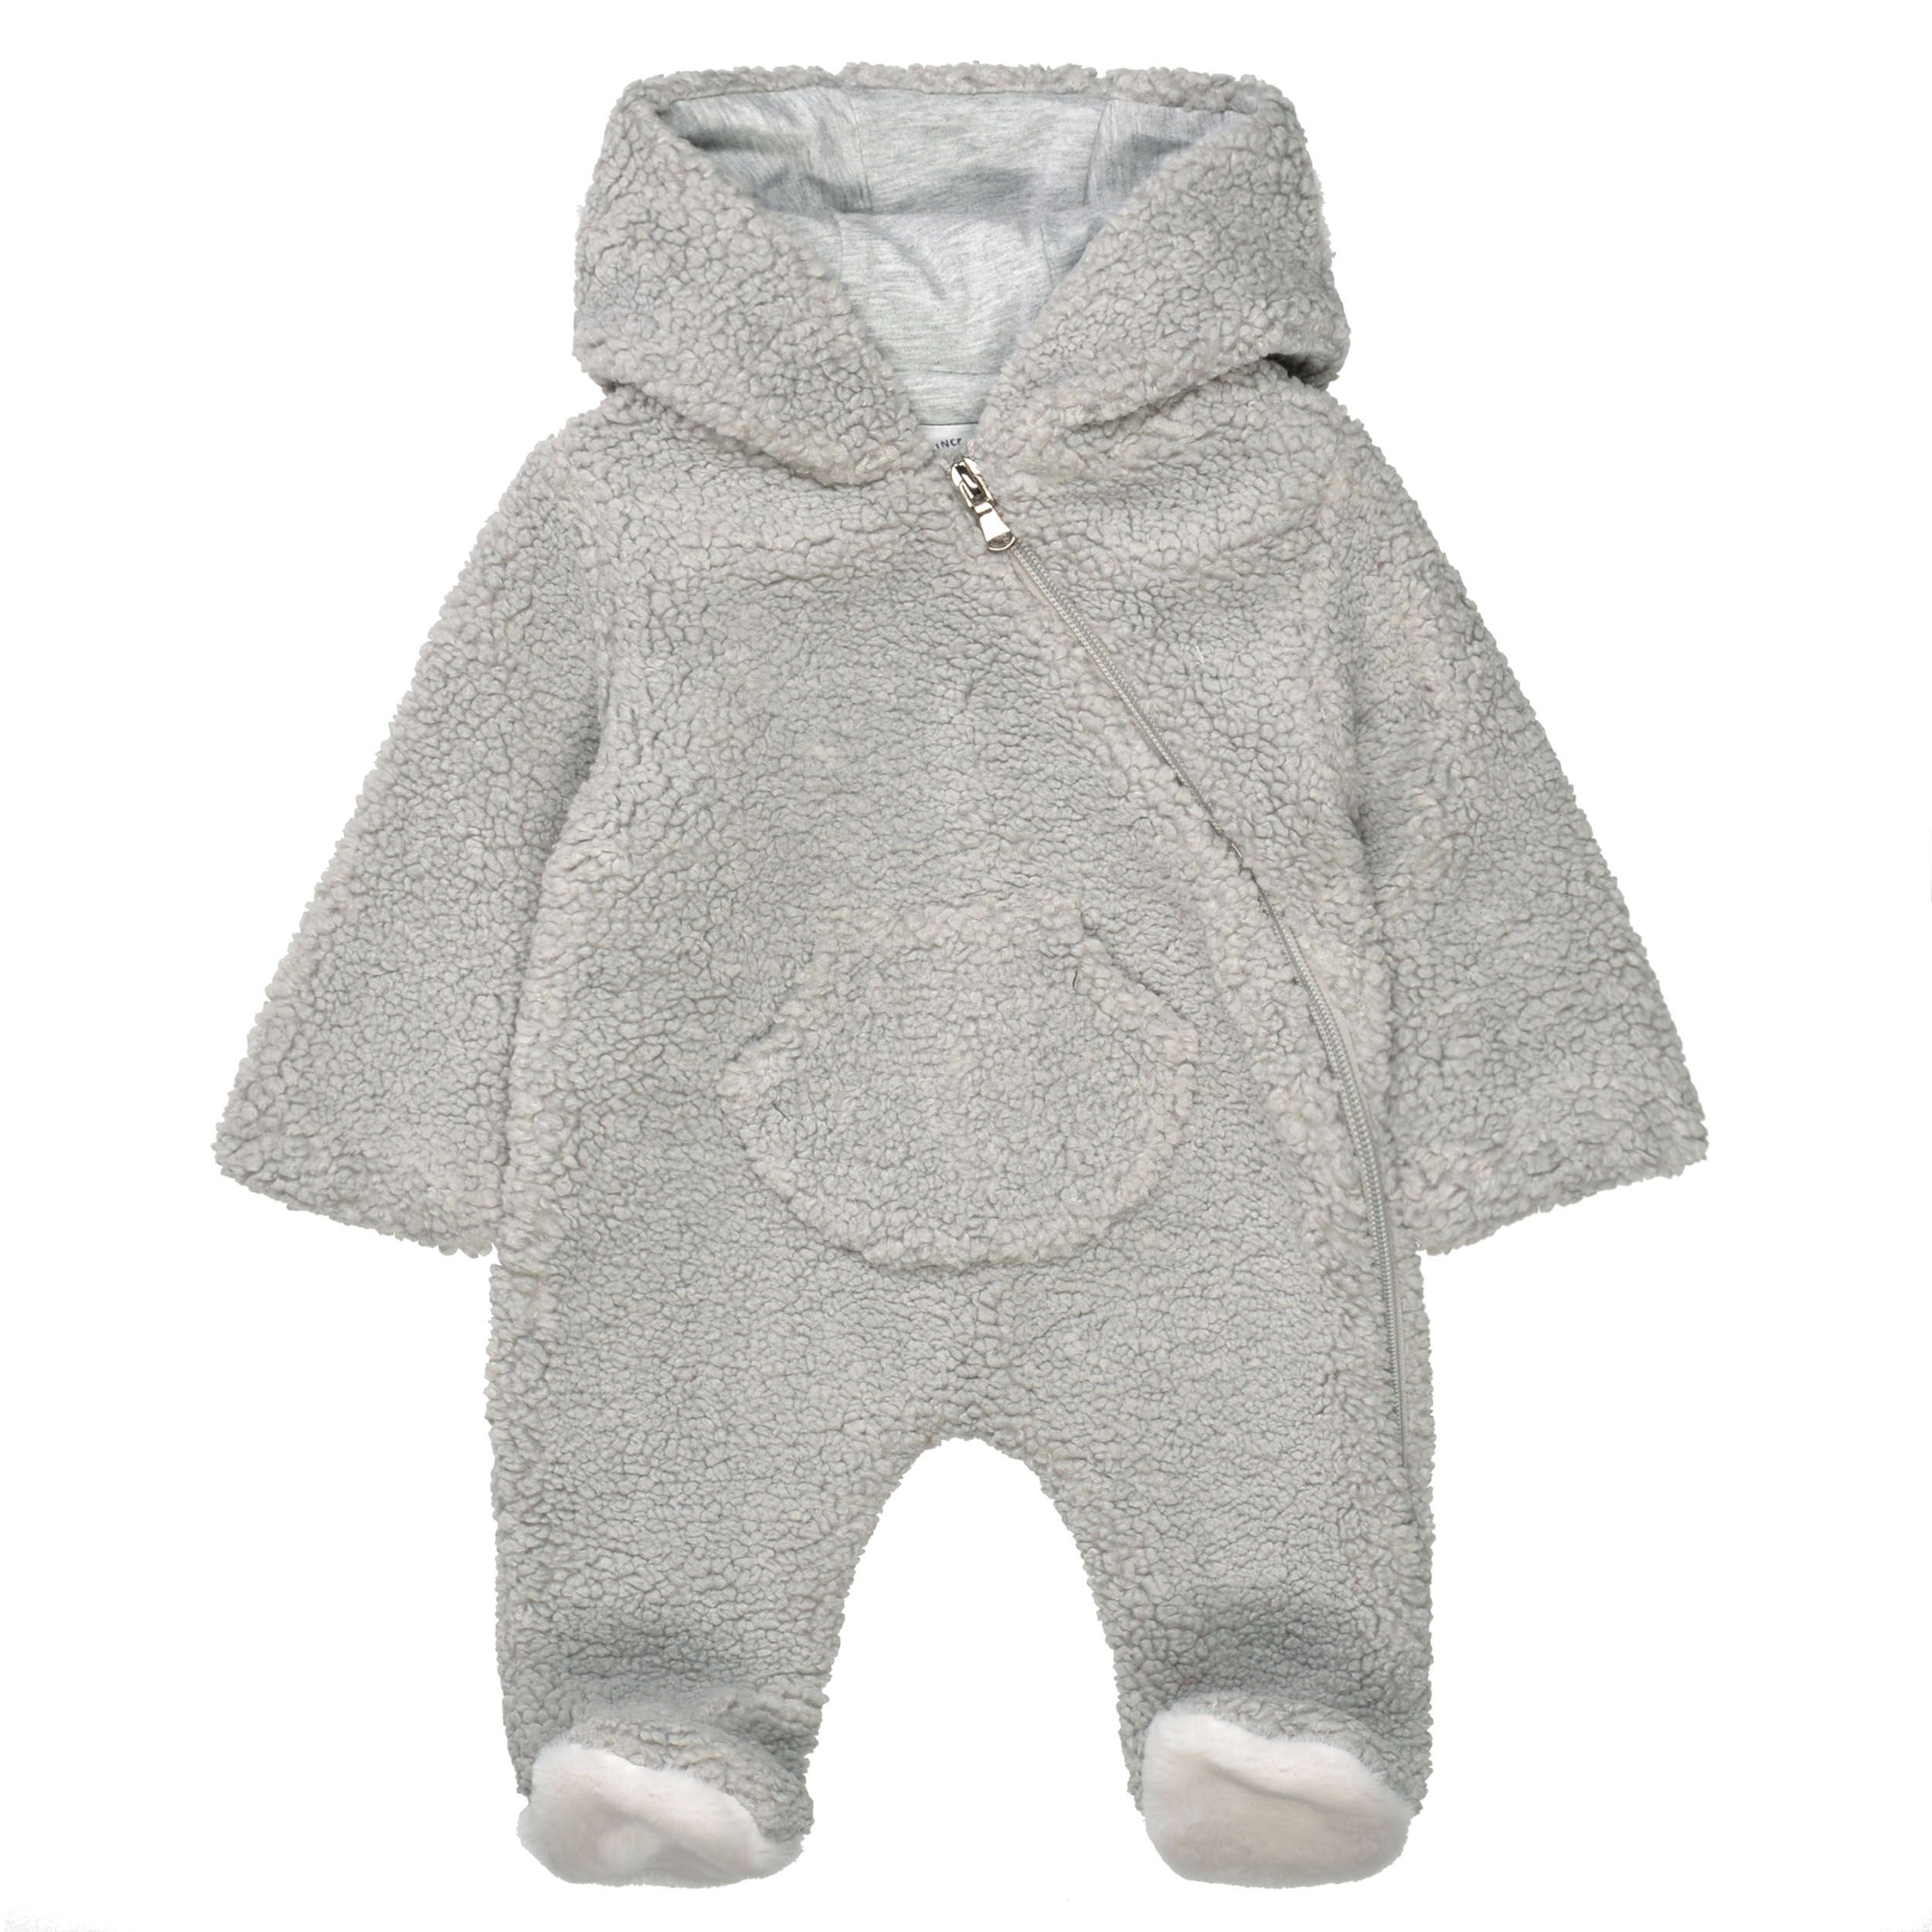 STACCATO Overall Baby Overall für Jungen